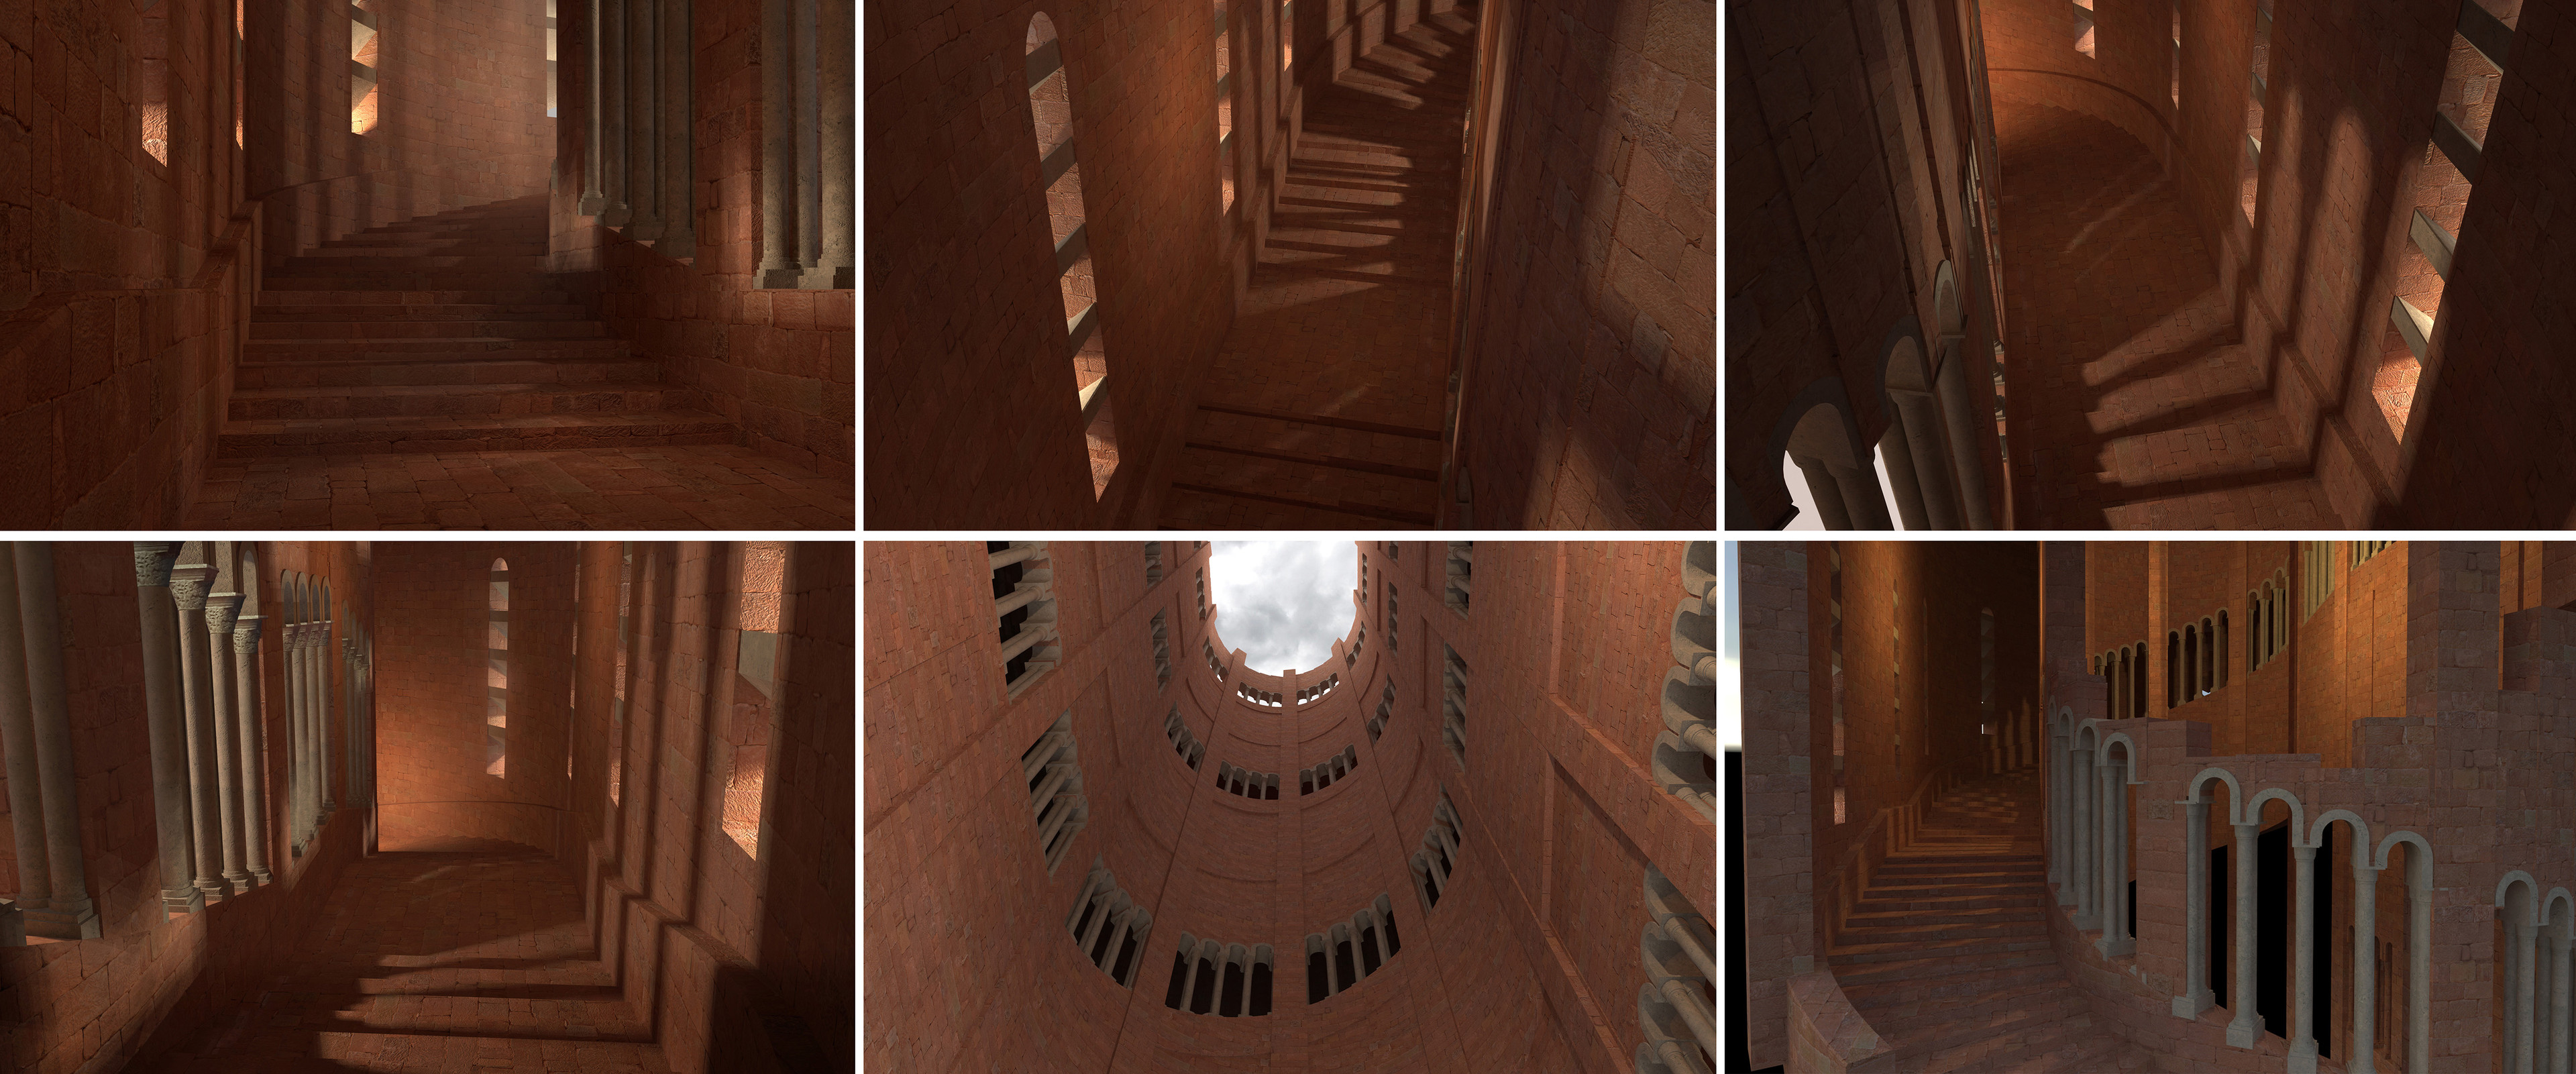 Early test renders in Keyshot to establish the look, it was important to keep a 'Red Keep' style with the pillars etc.